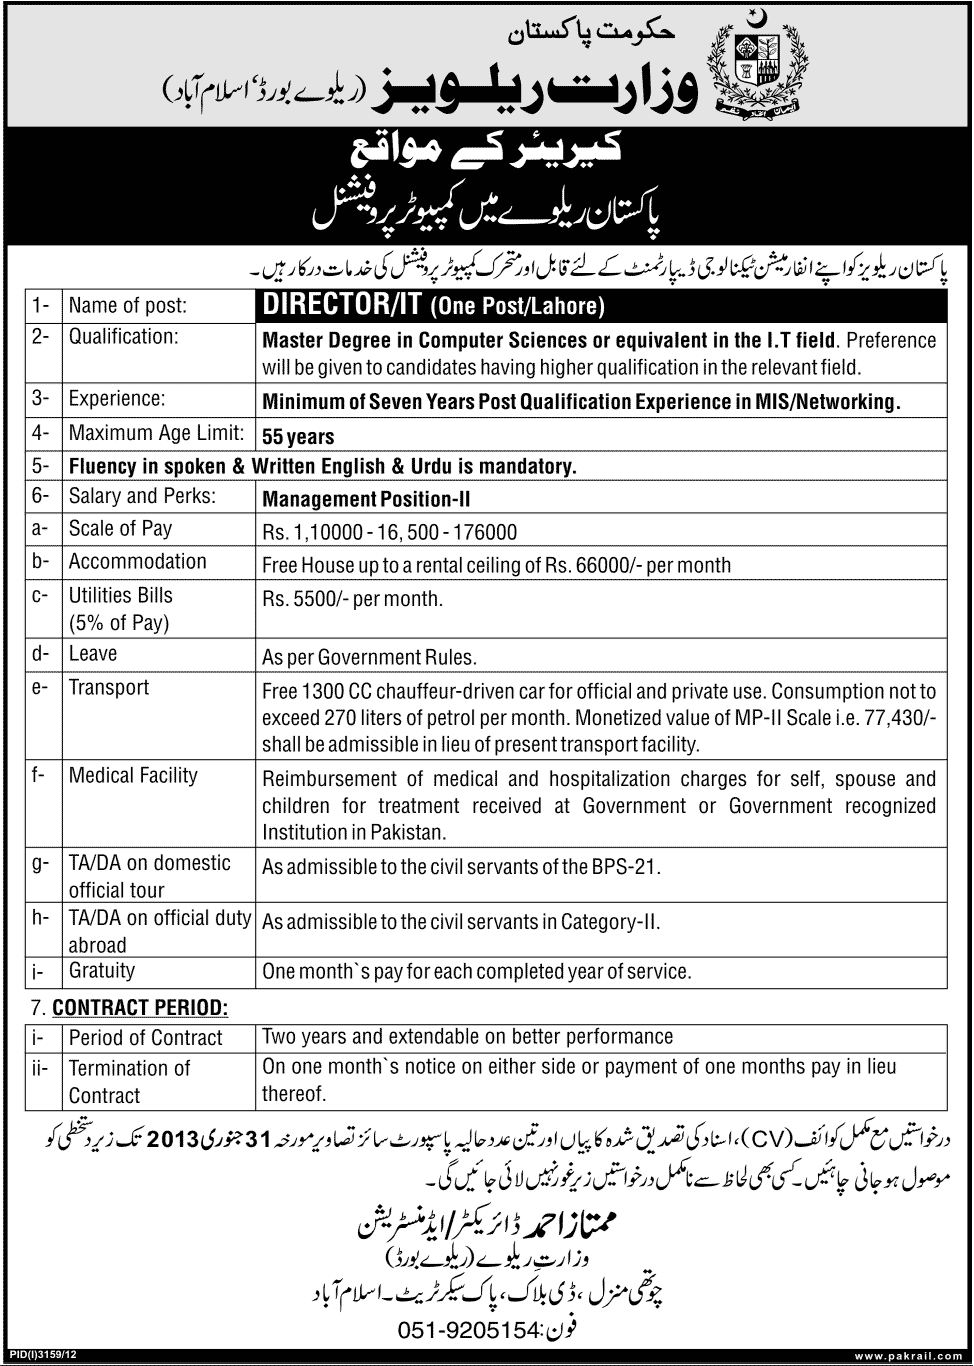 Pakistan Railway Job 2013 for Computer Professional as Director IT at Lahore